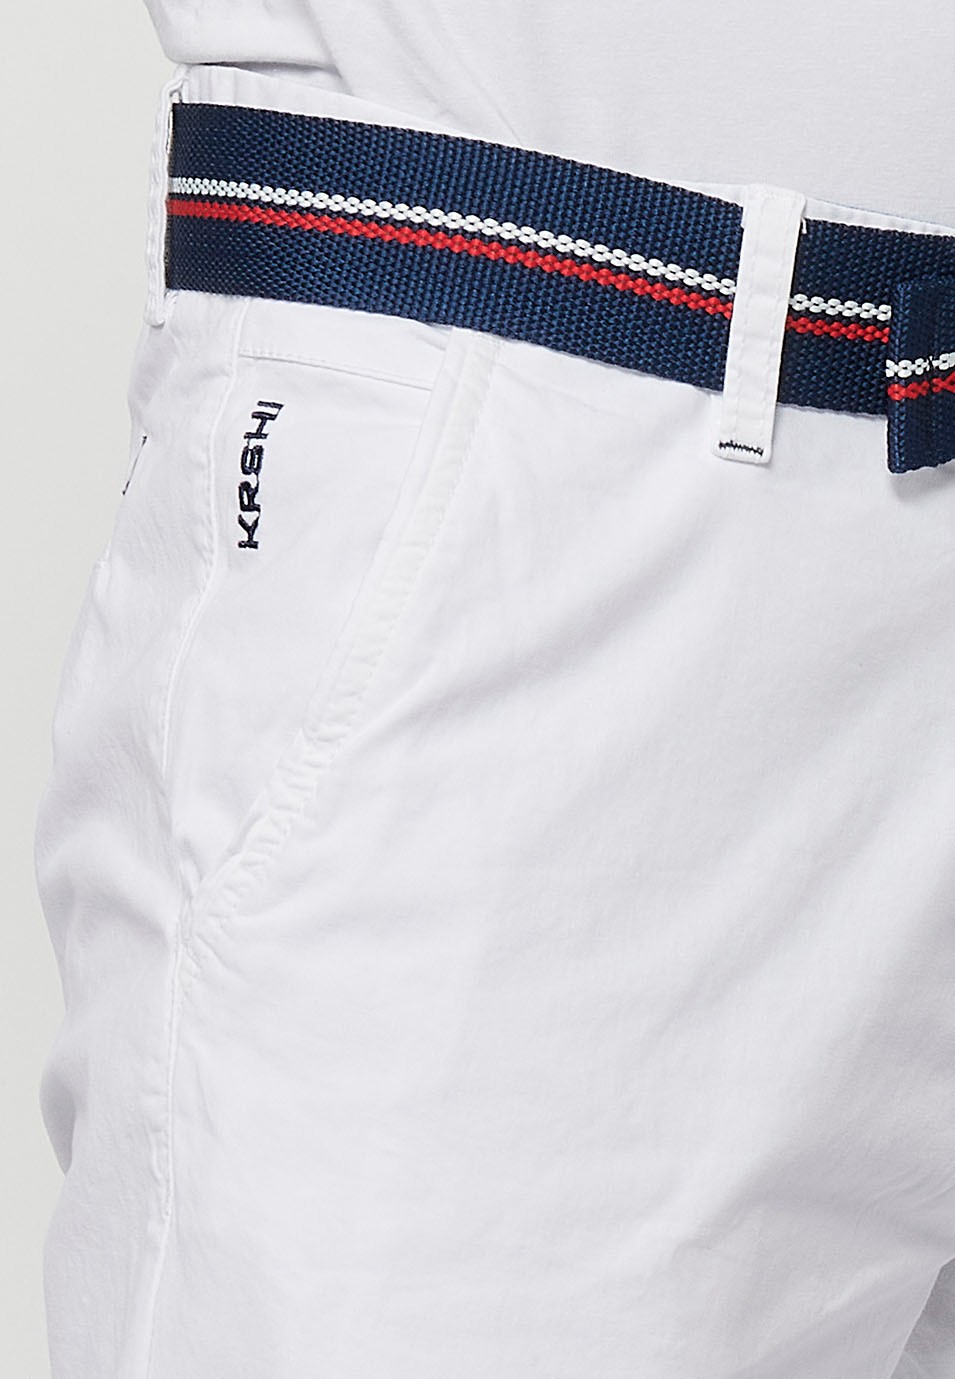 Shorts with a turn-up finish with front closure with zipper and button and belt in White for Men 5